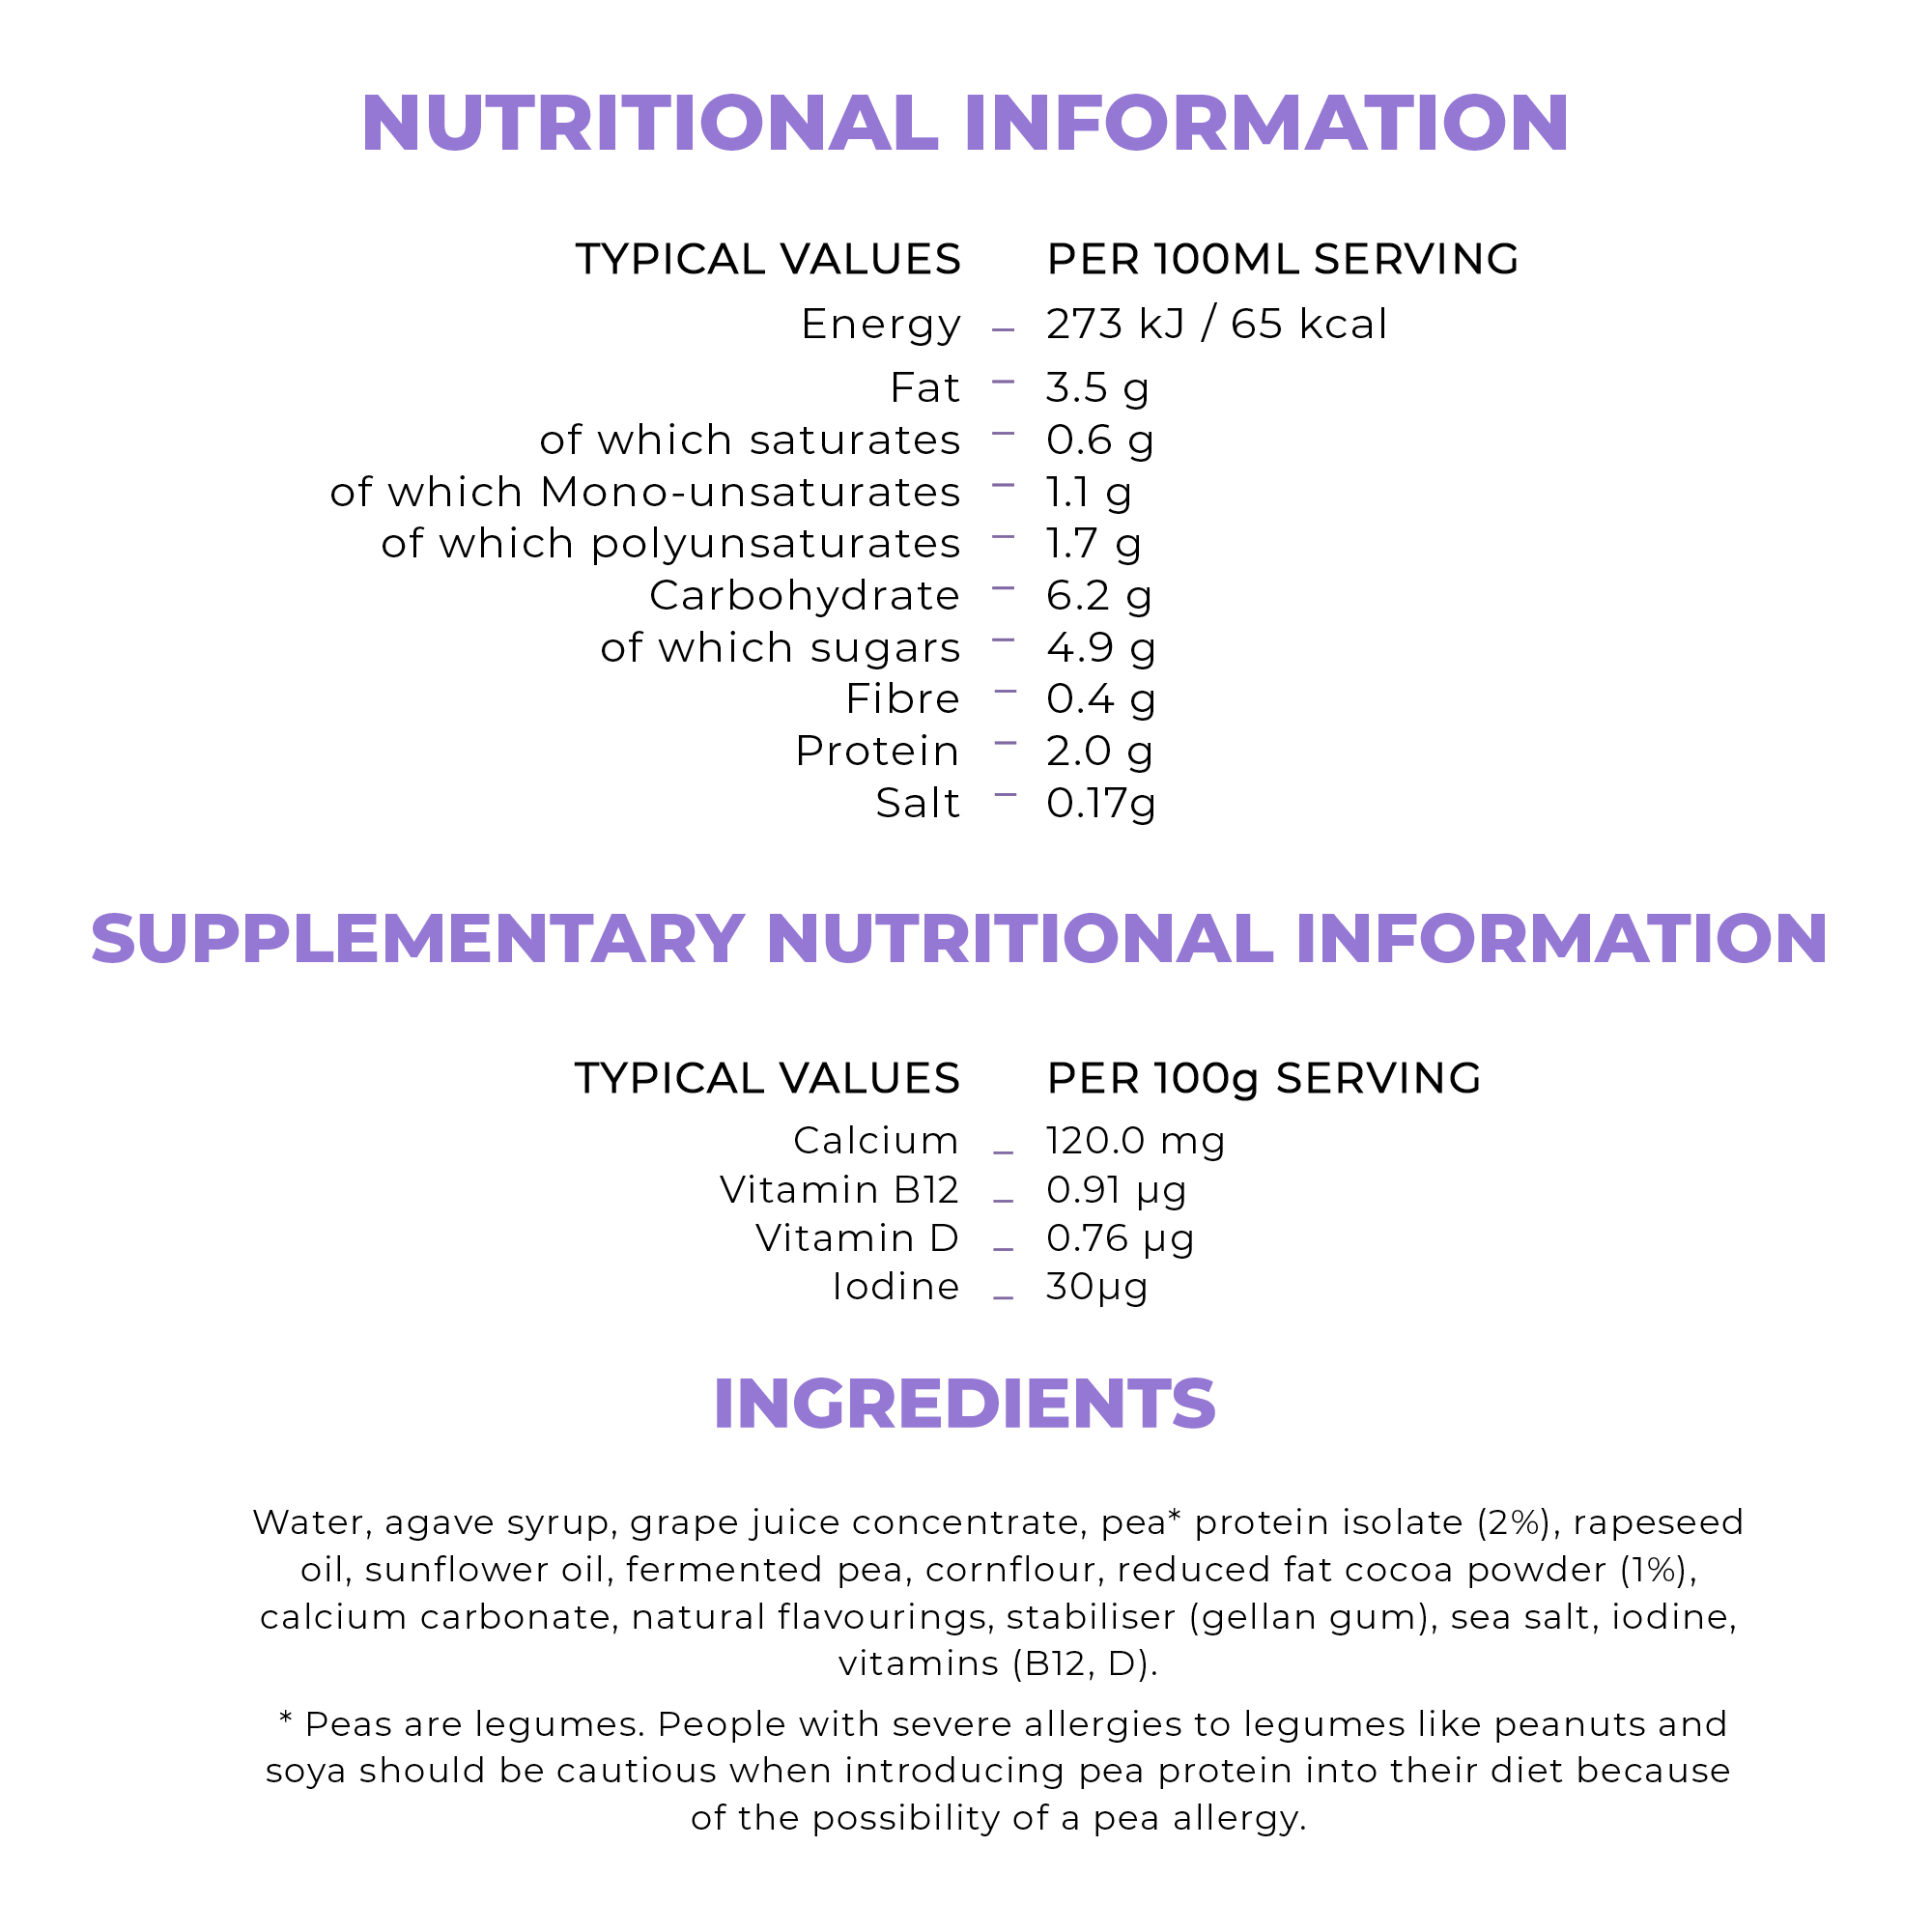 

                          TYPICAL VALUES / PER 100ML SERVING
                           Energy 254 kJ / 61 kcal Fat 3.5 g of which Saturates 0.6 g of which Mono-unsaturates 1.1 g of which polyunsaturates 1.7 g Carbohydrate 6.2 g of which sugars 4.9 g Fibre 0.4 g Protein 2.0 g Salt 0.17g 
                          Supplementary nutritional information 
                          TYPICAL VALUES / PER 100g SERVING
                           
                          Calcium 120.0 mg (15%RDI**) Vitamin B12 O.91 pg (20% RDI**) Vitamin D O.76 pg (5% RDI**) Iodine 30pg (5% RDI**) 
                          Ingredients 
                          Water, agave syrup, pea protein isolate (2%), rapeseed oil, sunflower oil, fermented pea, cornflour, calcium carbonate, colour (burnt sugar), natural flavourings, sea salt, stabiliser (gellan gum), iodine, vitamins (B12, D). 

                          